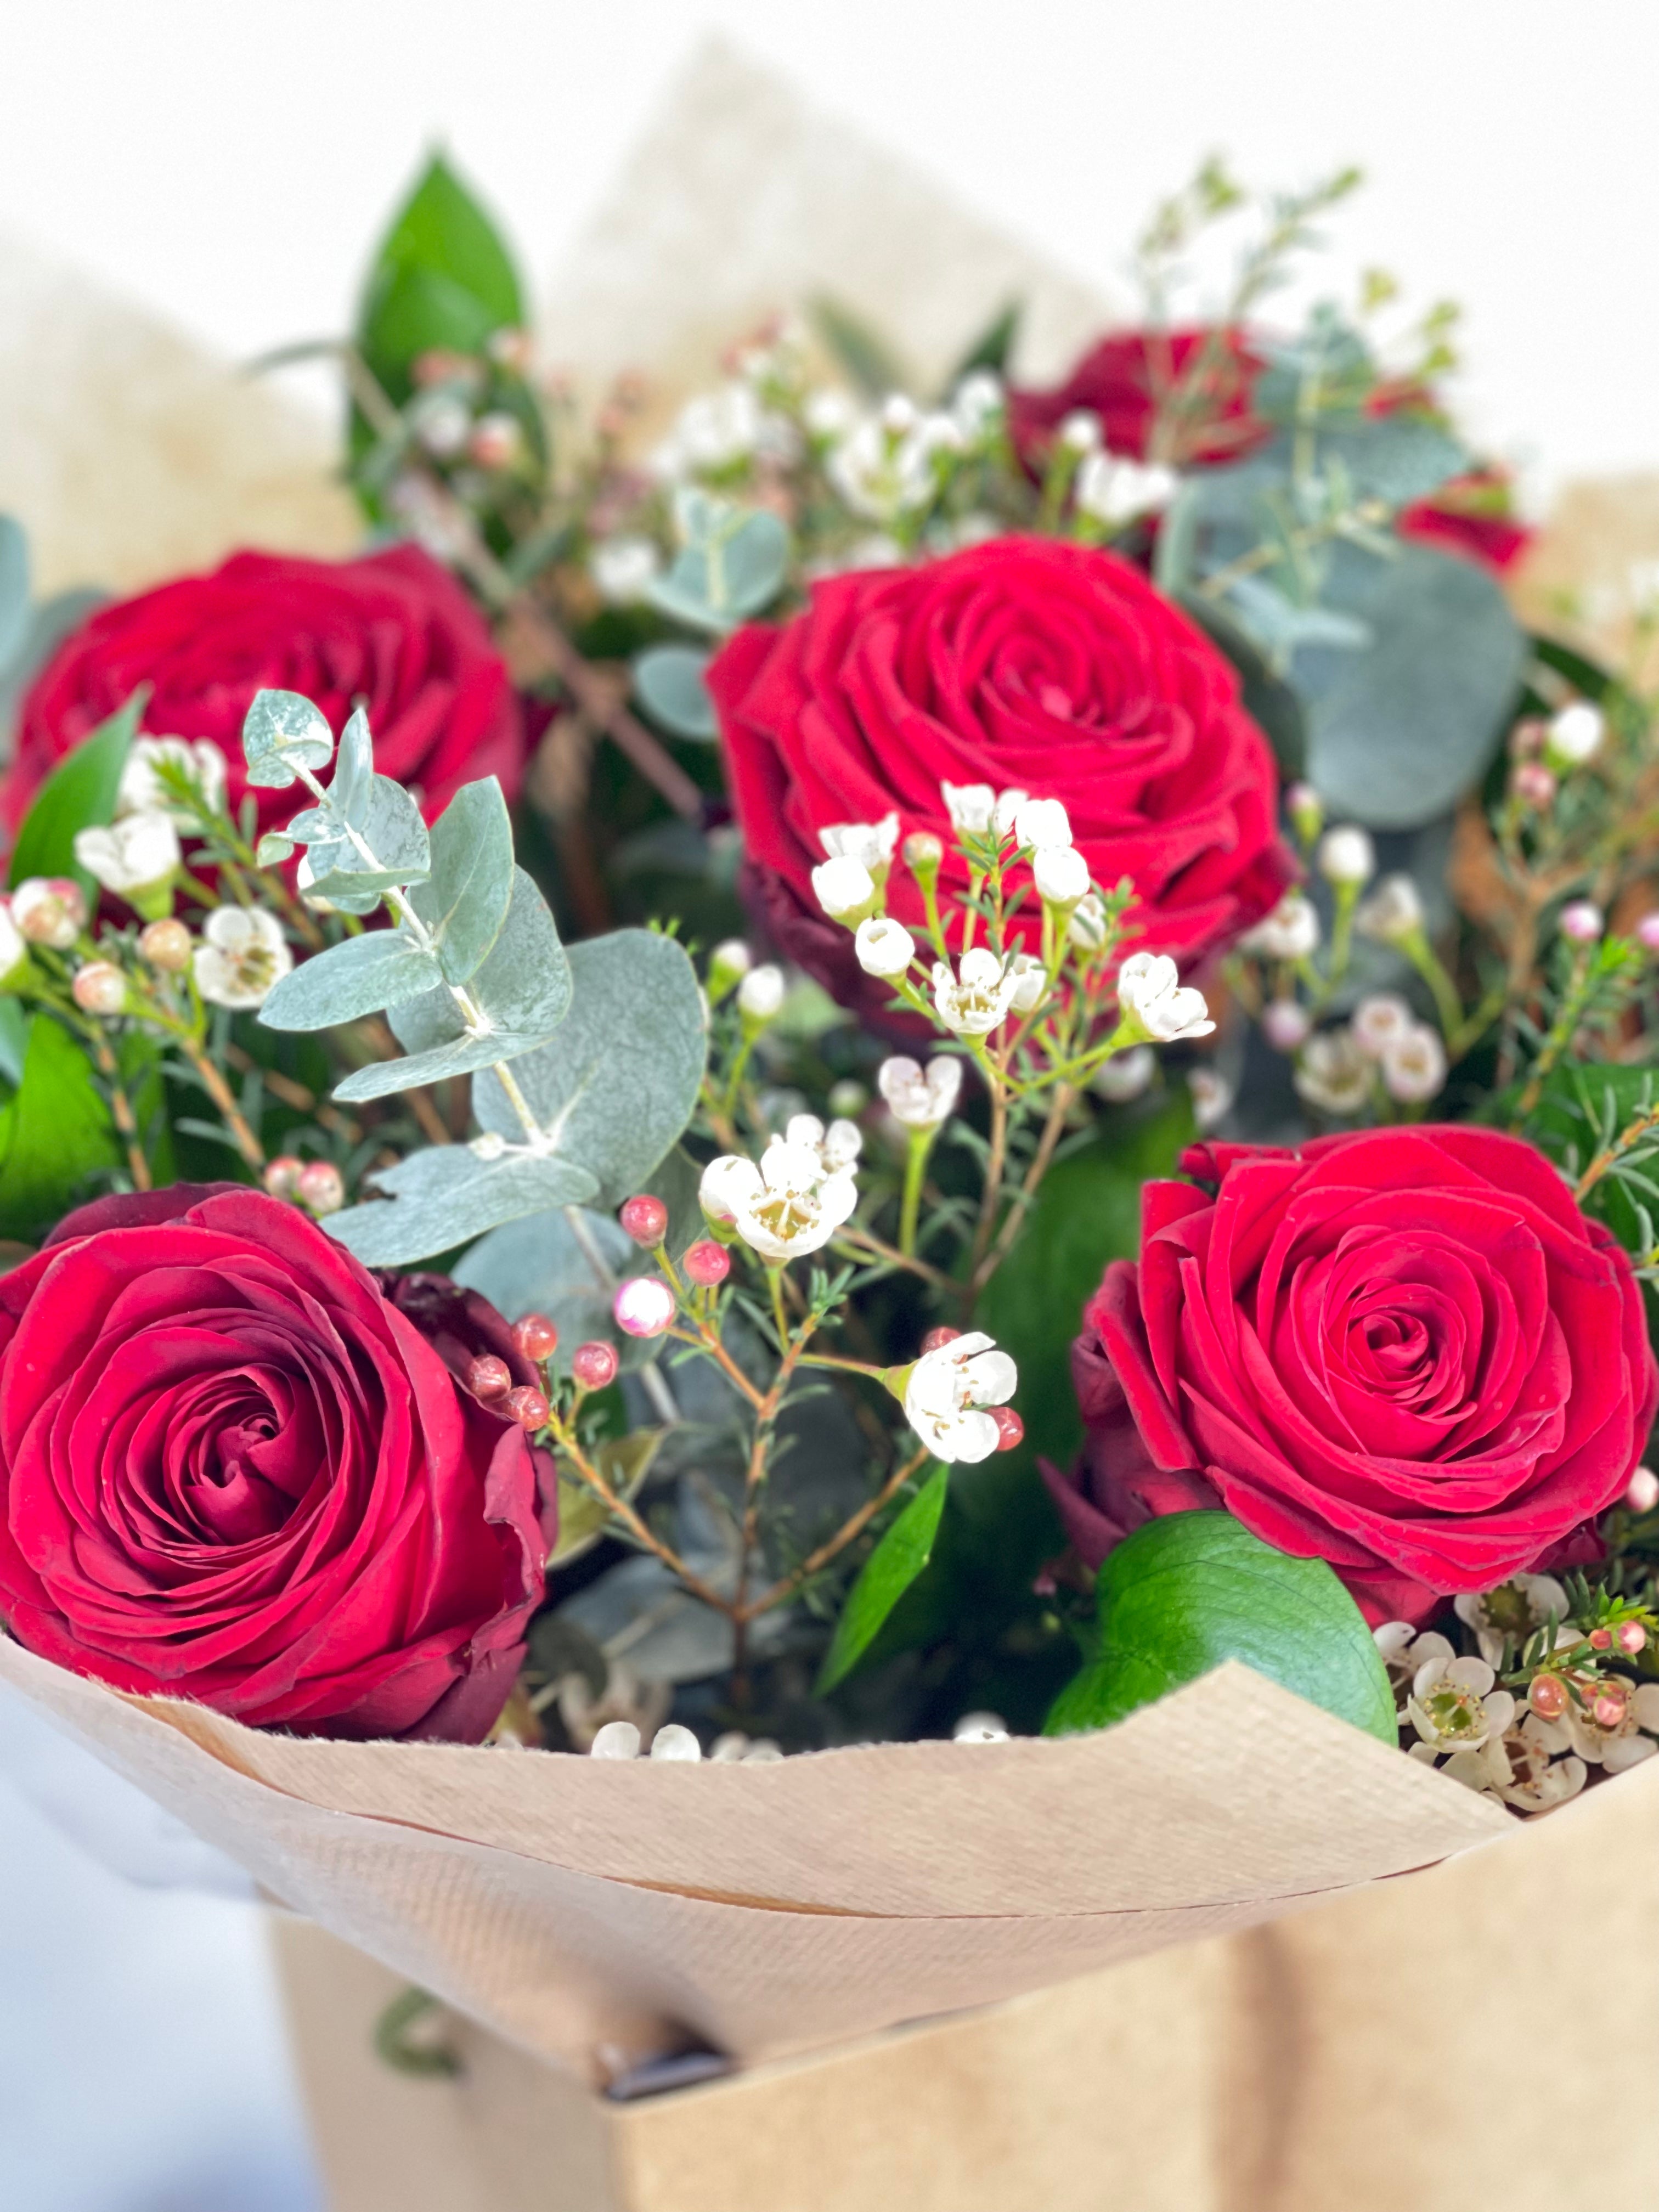 Valentine's Rose Gift with 6 Red Roses